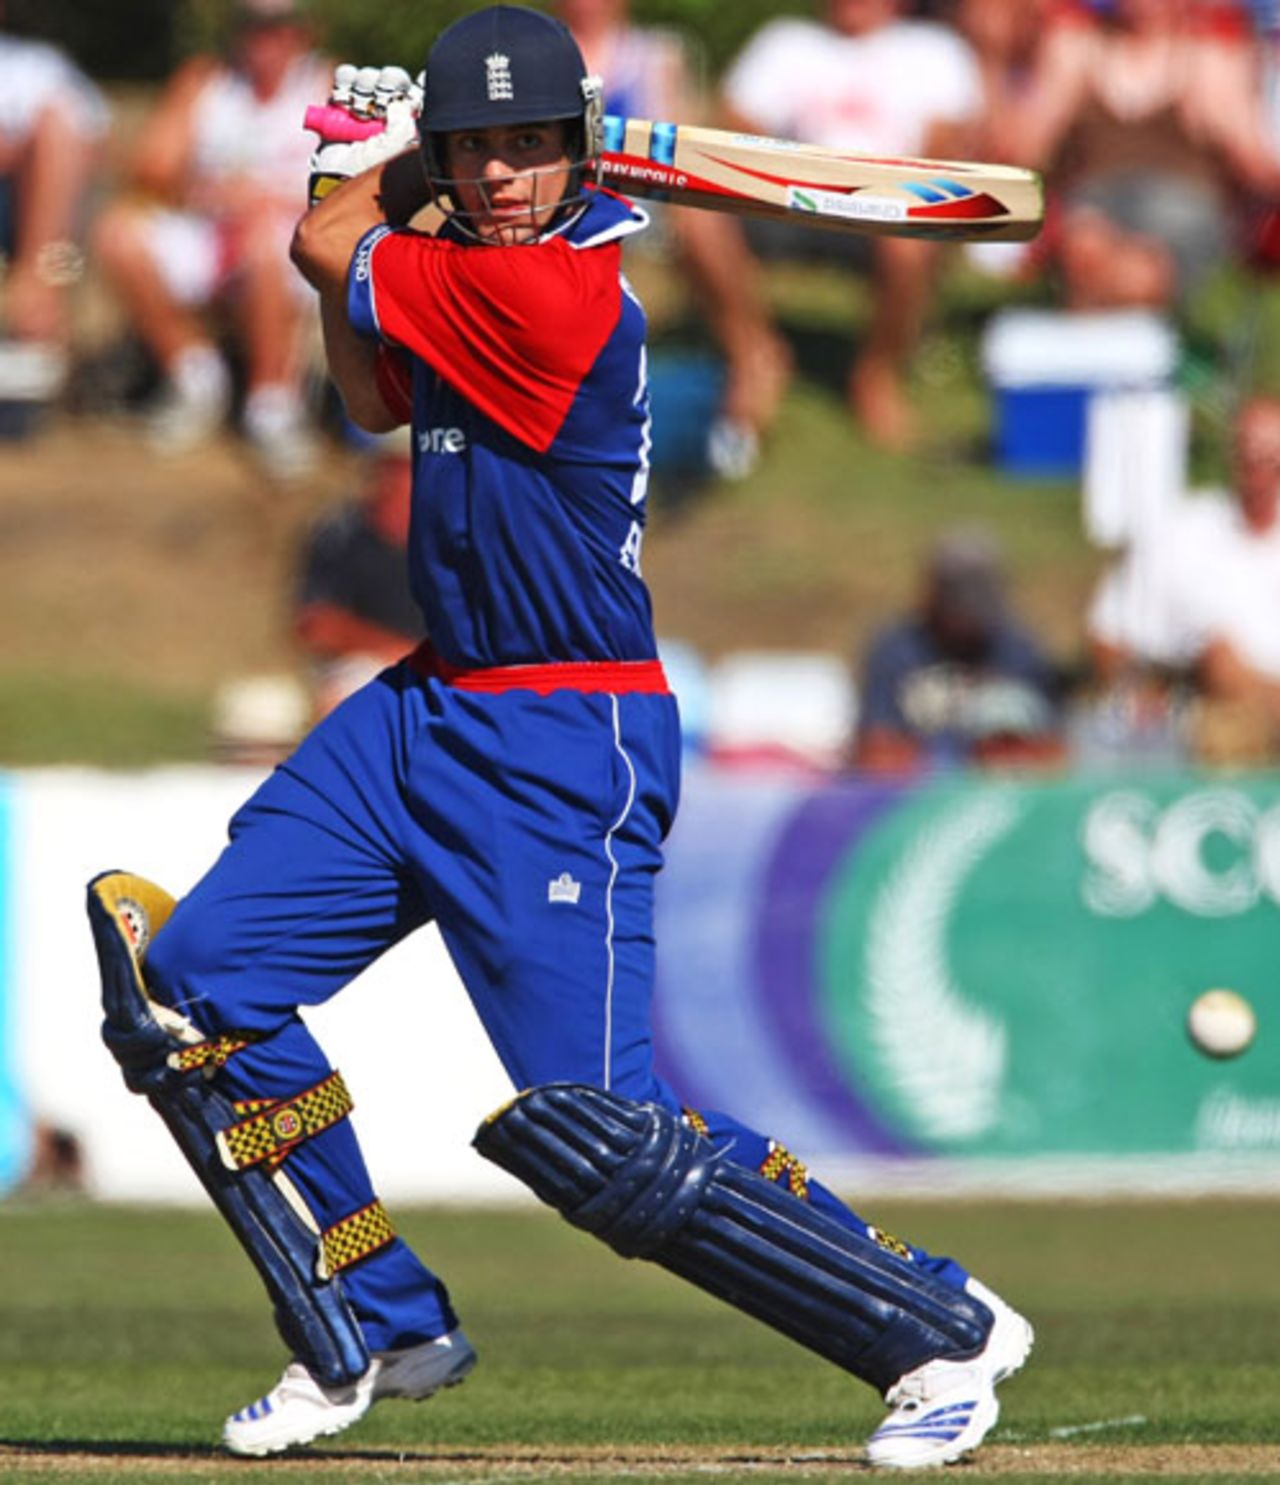 Alastair Cook cuts the ball during his century, Canterbury v England XI, 2nd 50-over tour match, Christchurch, February 3, 2008 